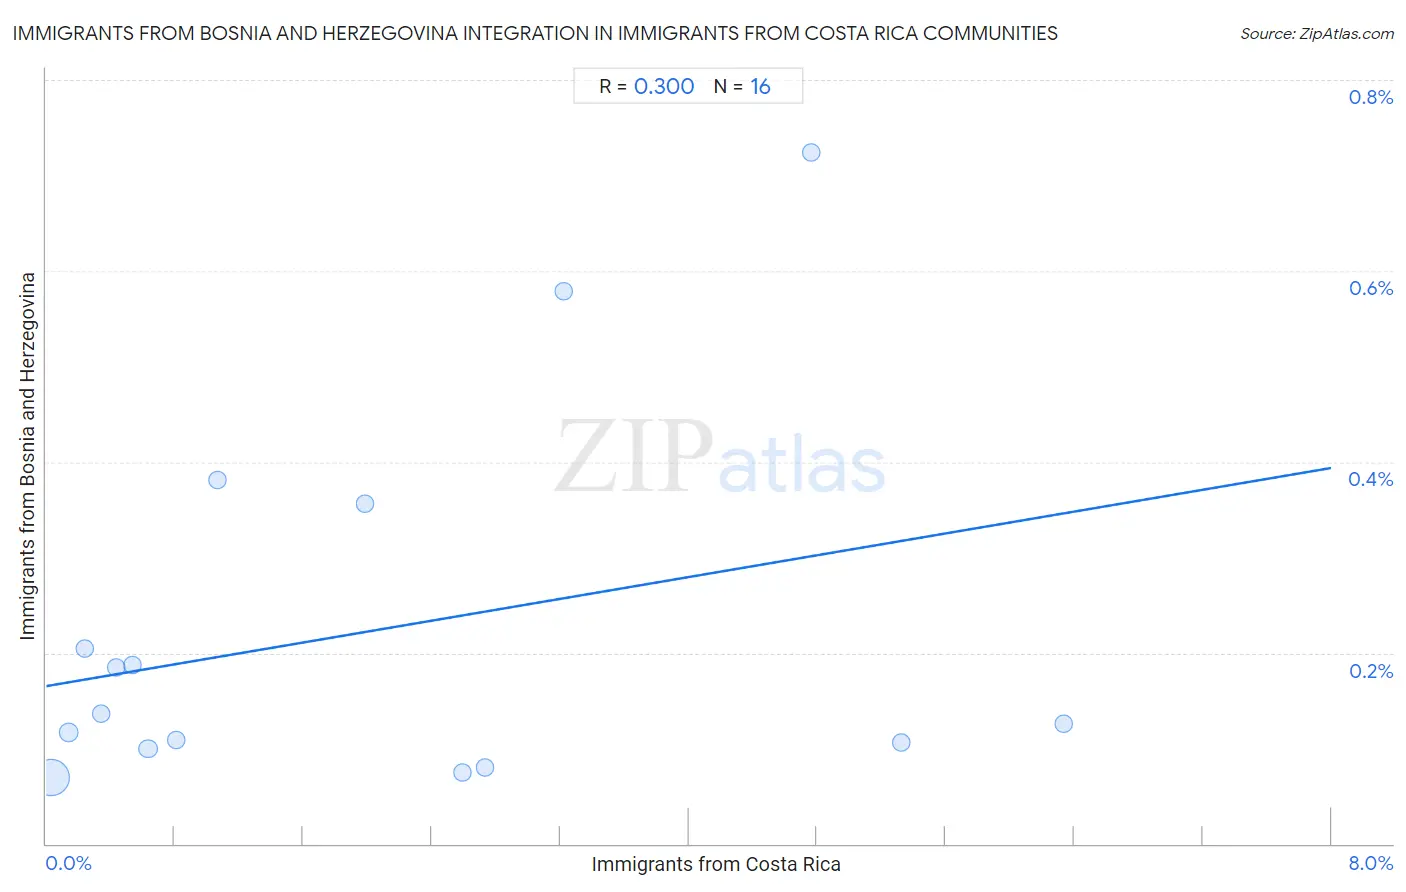 Immigrants from Costa Rica Integration in Immigrants from Bosnia and Herzegovina Communities